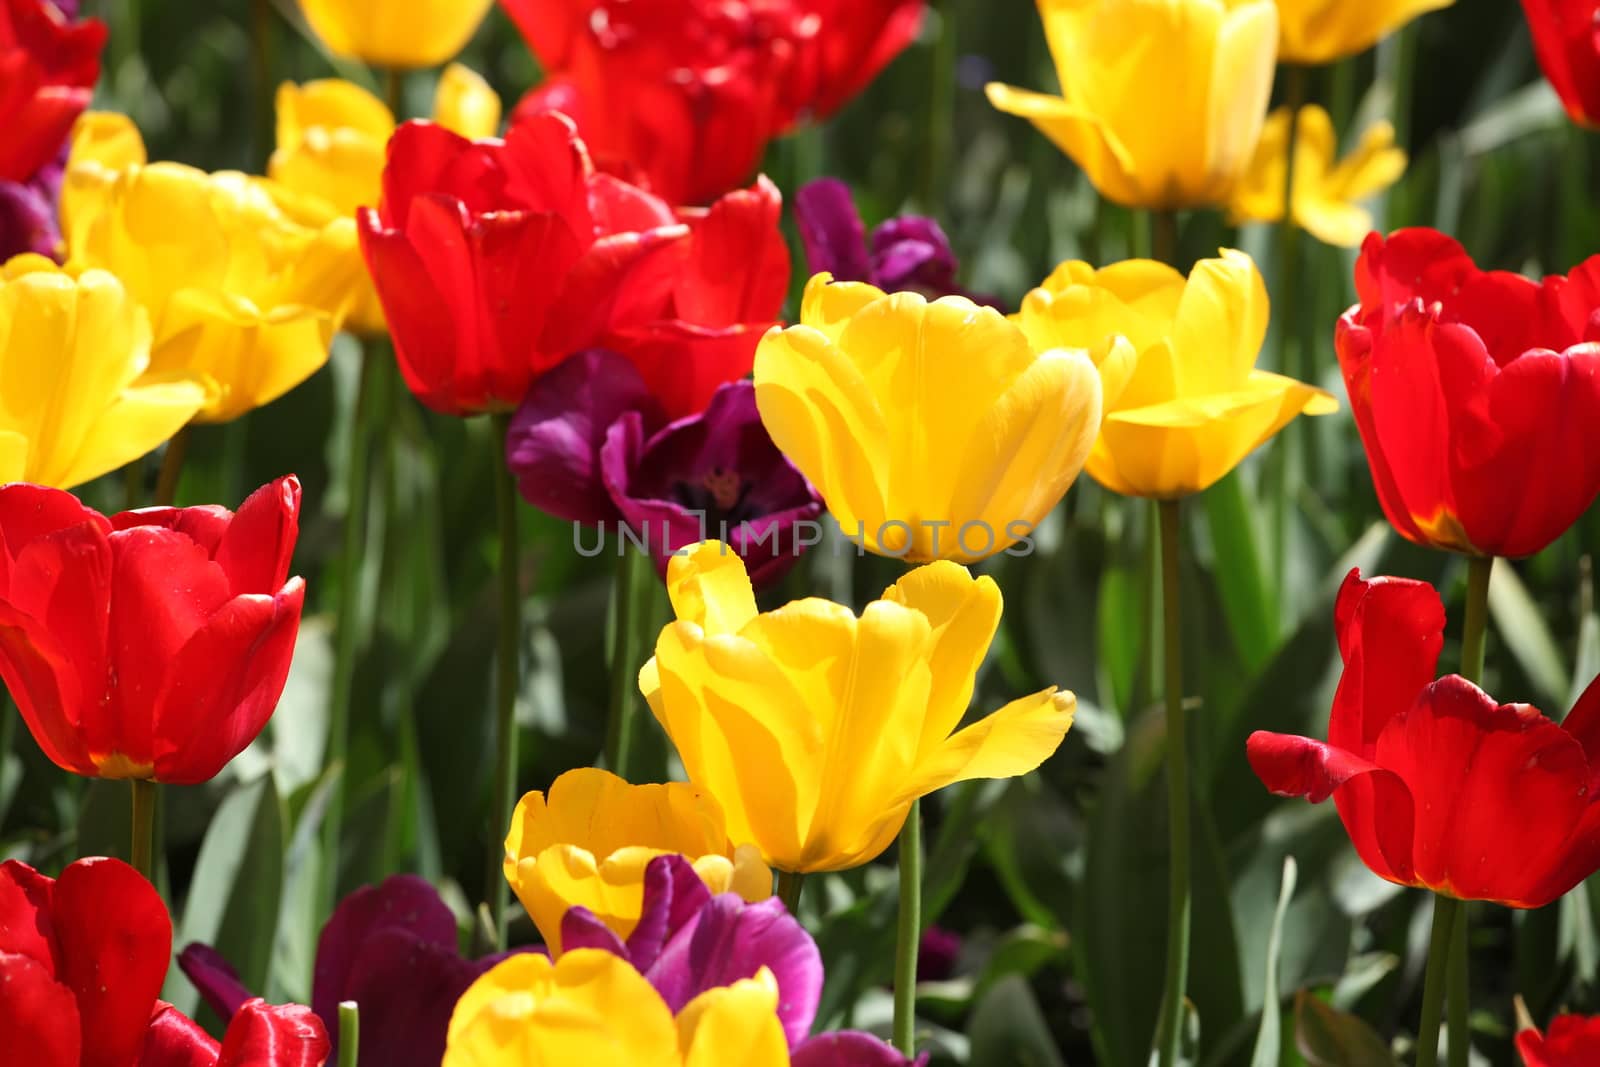 Colorful tulips in Amsterdam, Netherlands.